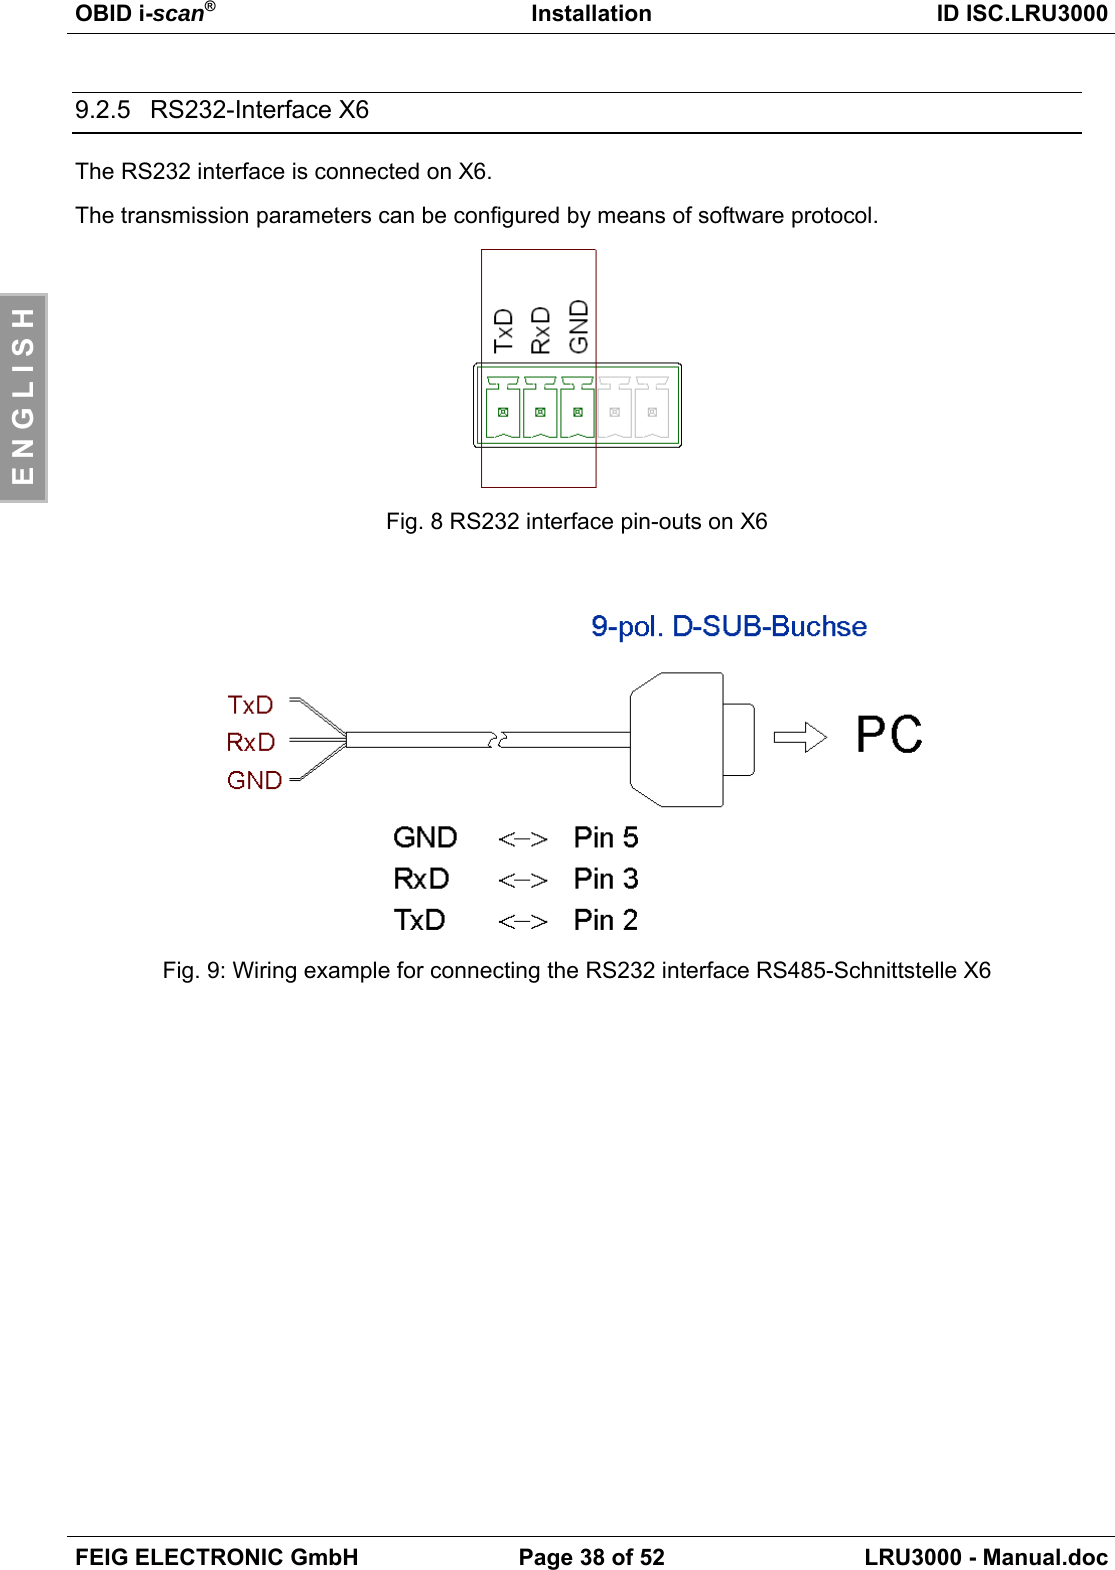 OBID i-scan®Installation ID ISC.LRU3000FEIG ELECTRONIC GmbH Page 38 of 52 LRU3000 - Manual.docE N G L I S H9.2.5 RS232-Interface X6The RS232 interface is connected on X6.The transmission parameters can be configured by means of software protocol.Fig. 8 RS232 interface pin-outs on X6Fig. 9: Wiring example for connecting the RS232 interface RS485-Schnittstelle X6